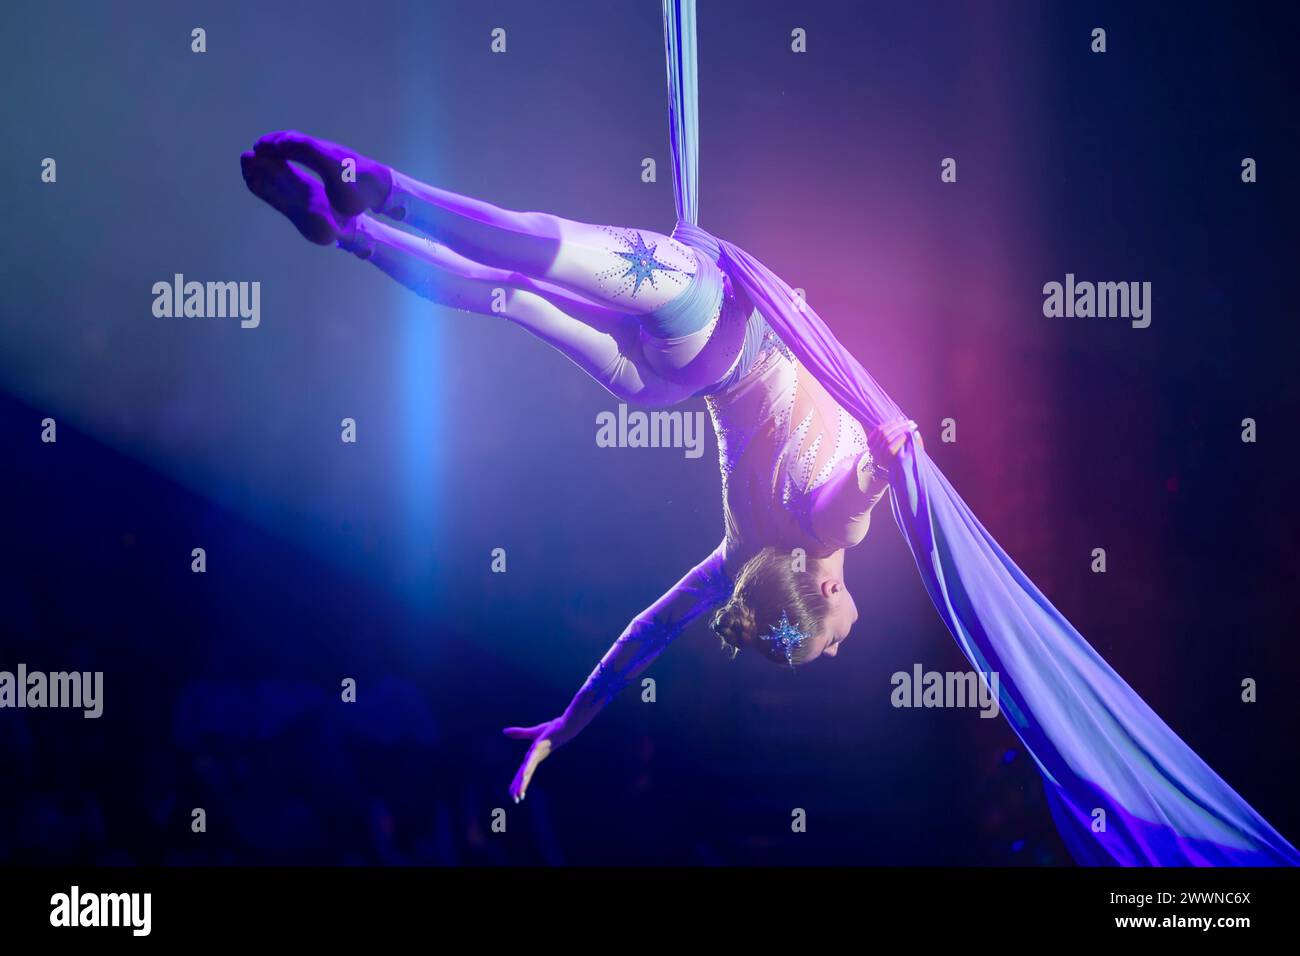 Performance by a circus acrobat artist. Girls perform aerial acrobatic elements on fabric. Stock Photo